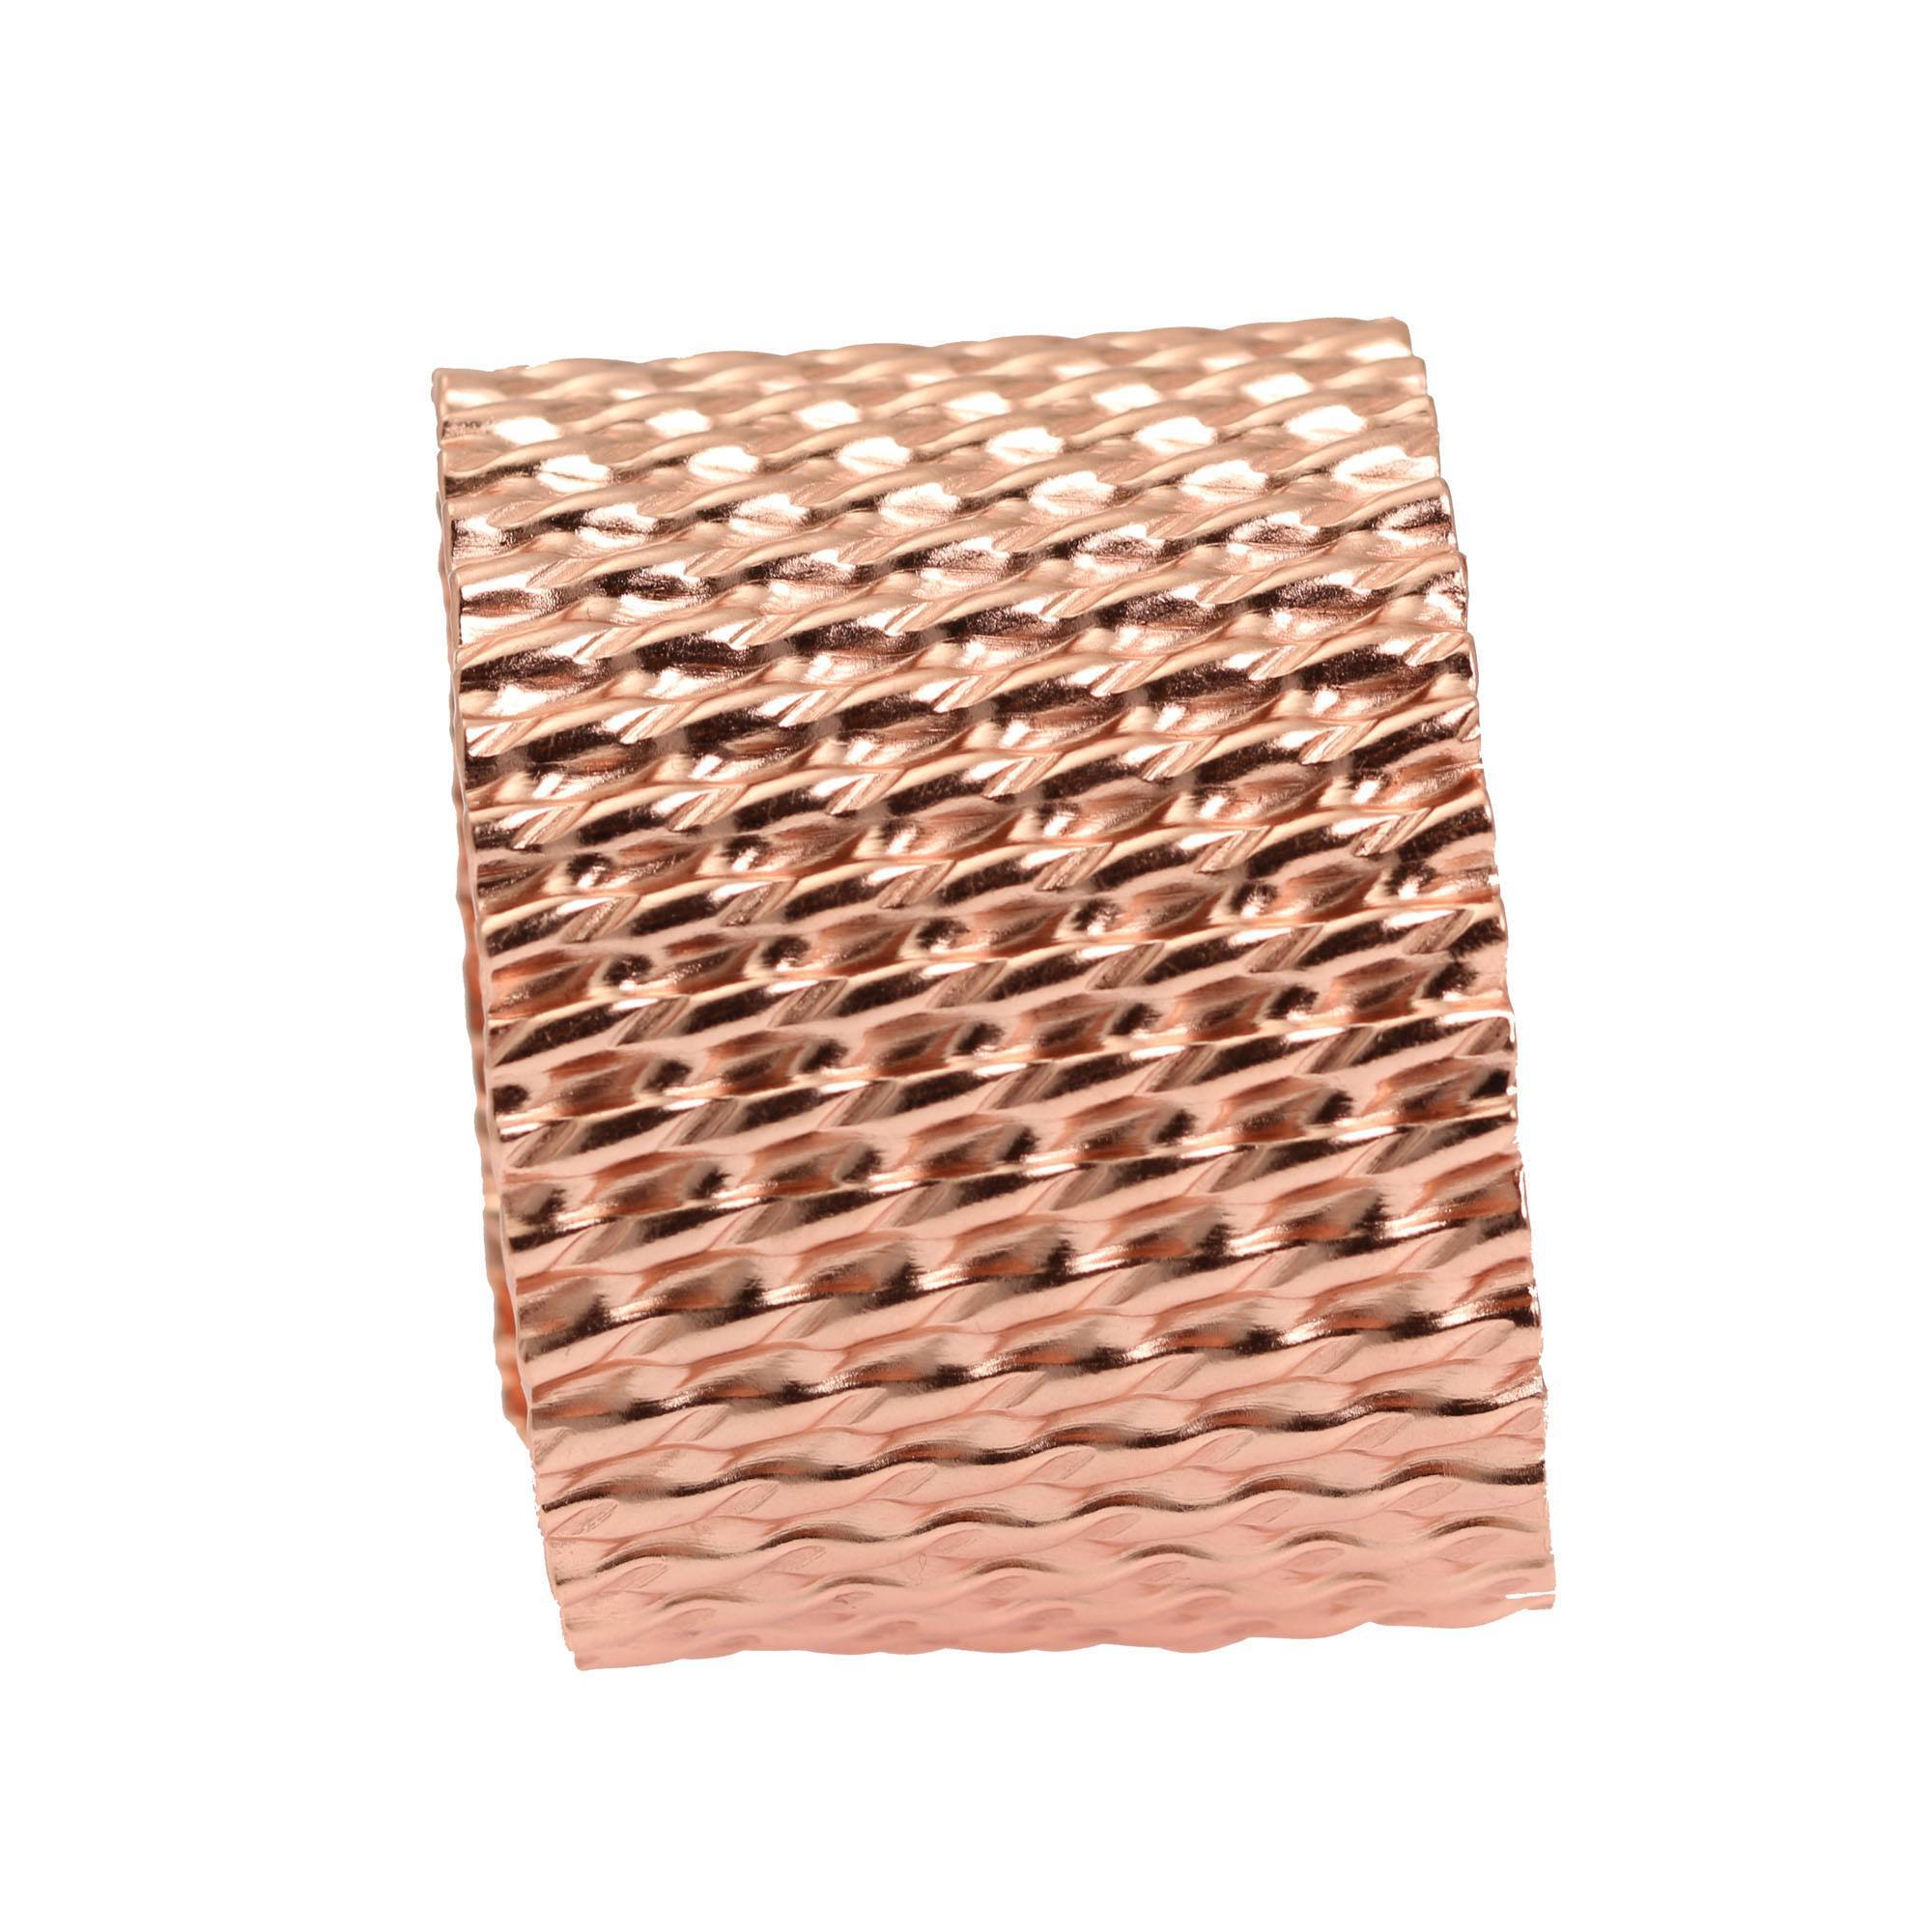 Detail View of Double Corrugated Copper Cuff